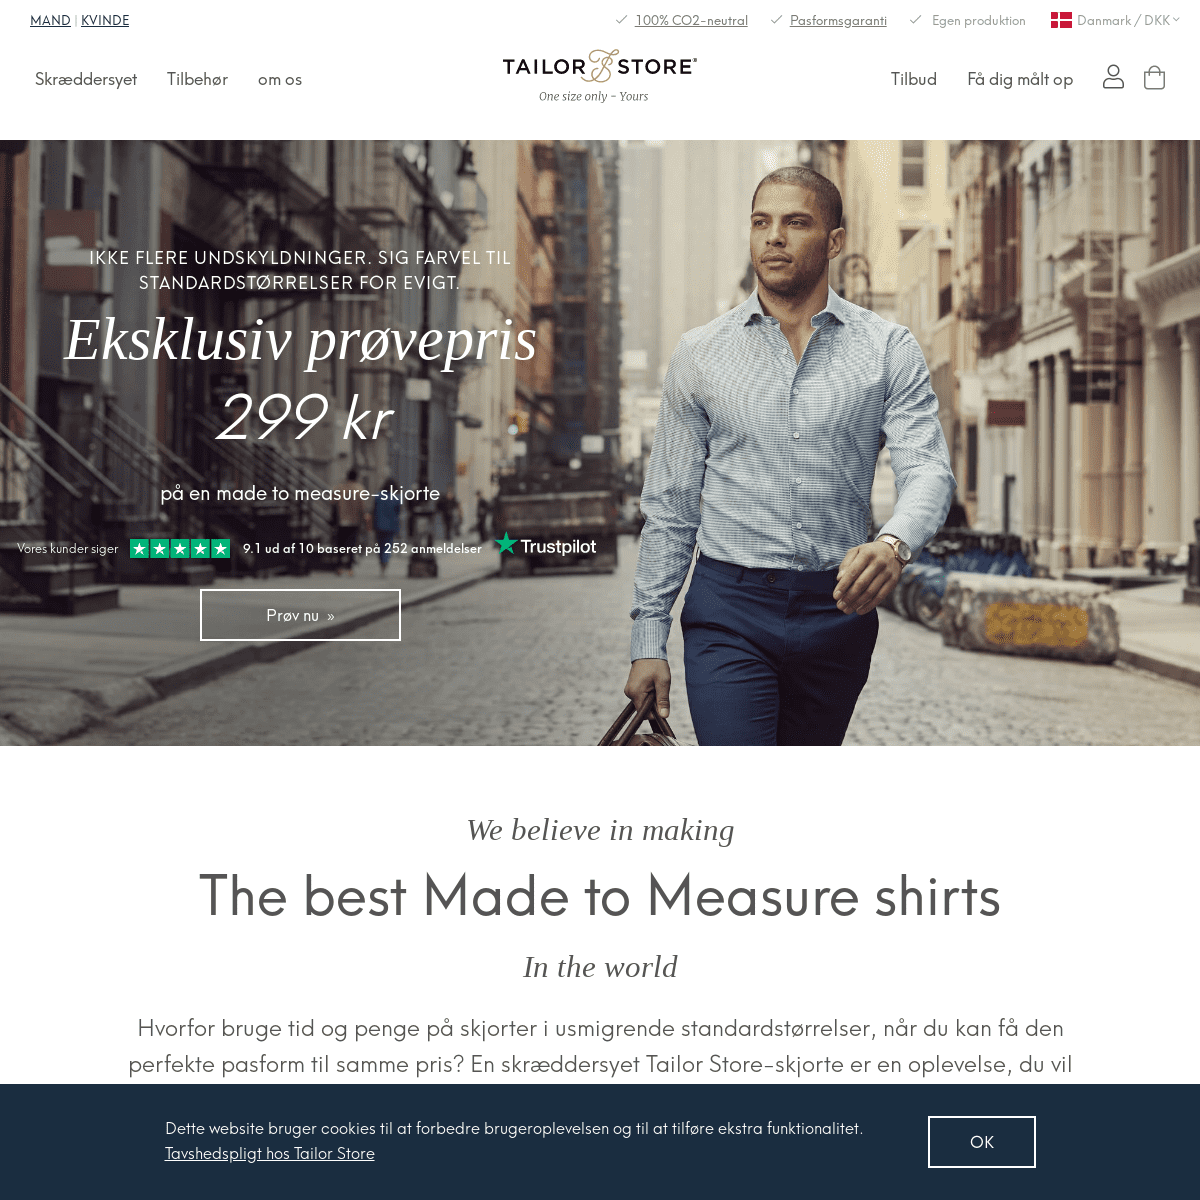 Tailor Store: One Size Only – Yours. | Tailor Store®